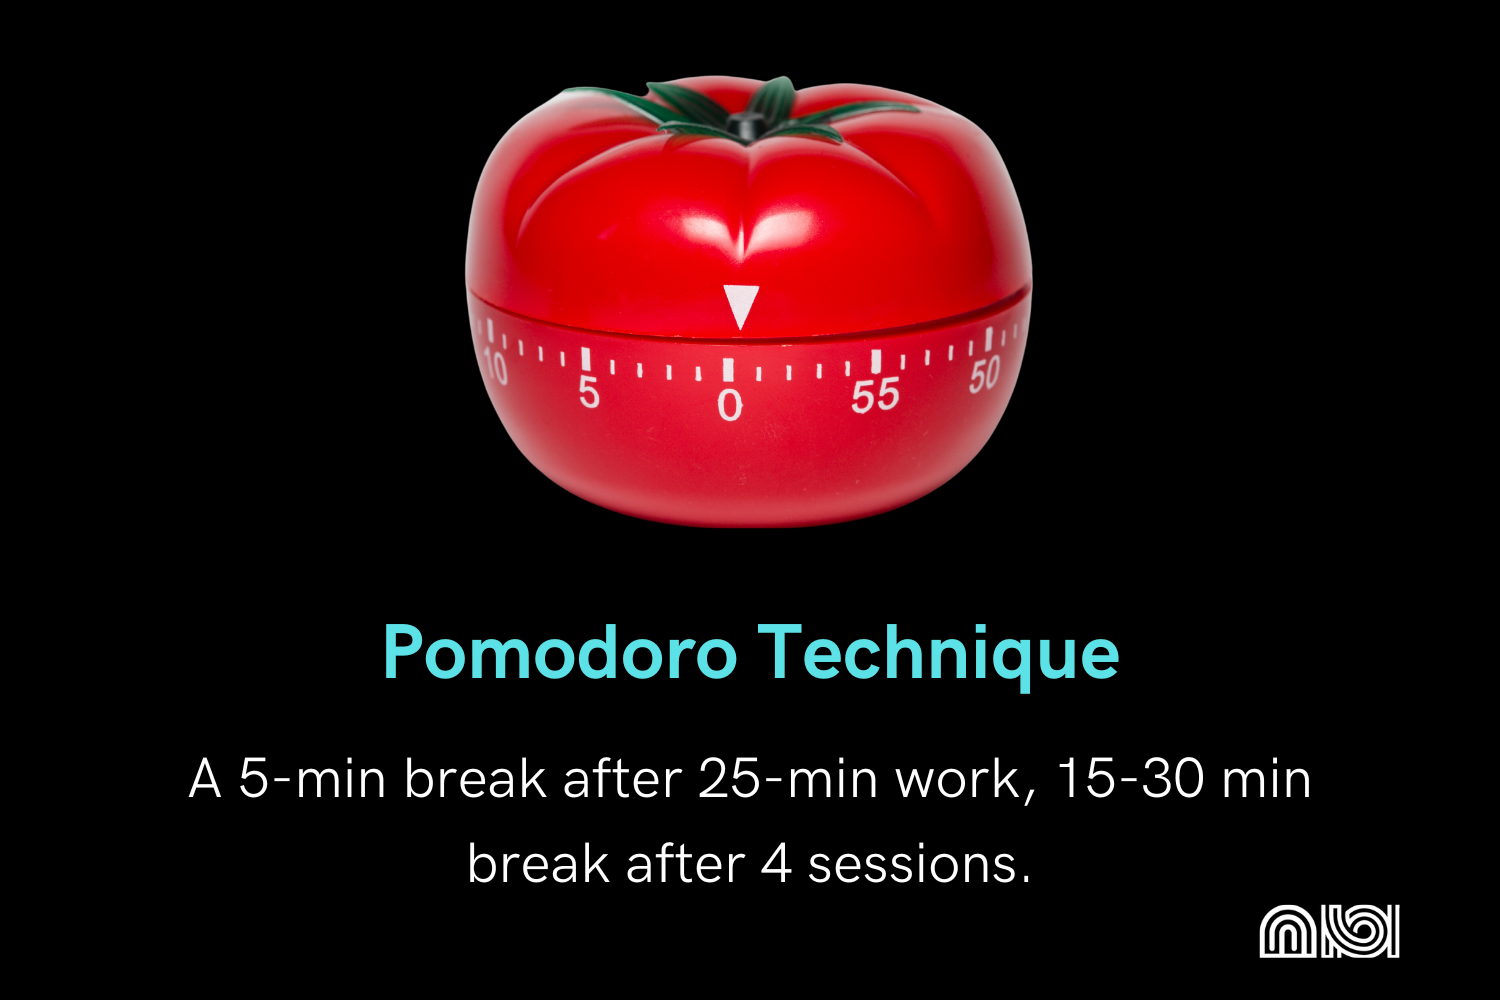 Visual depiction of the Pomodoro Technique: 5-minute break after 25 minutes of work, followed by a 15-30 minute break after four work sessions.